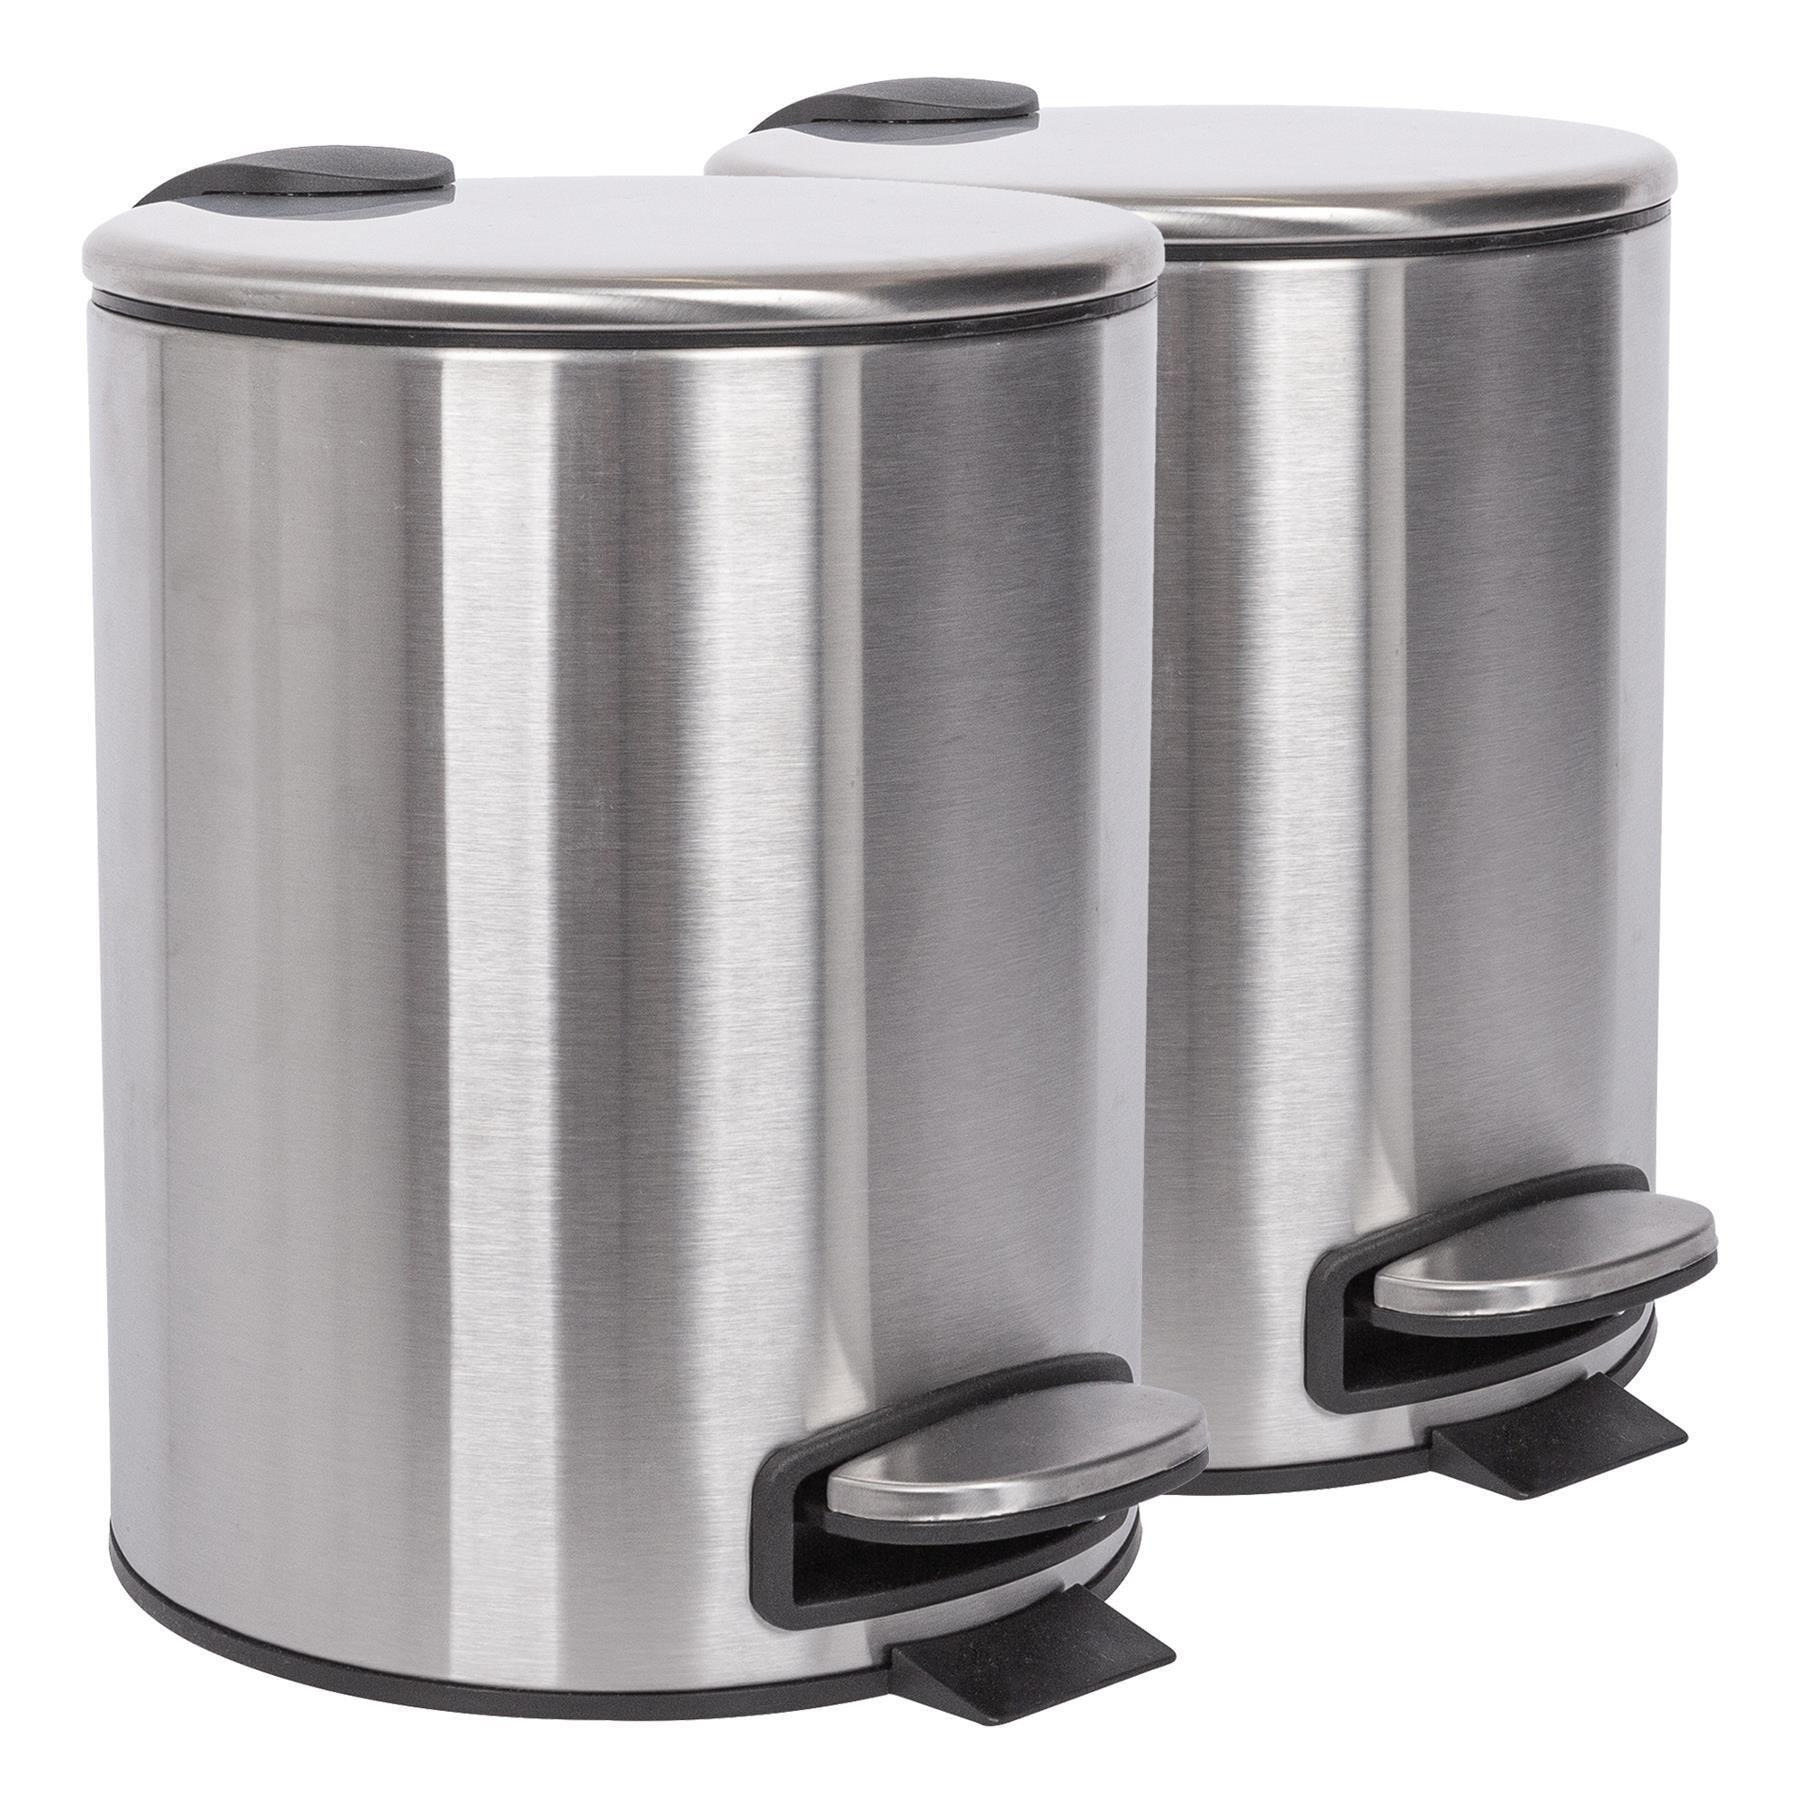 Round Stainless Steel Pedal Bins - 5L - Brushed - Pack of 2 - image 1